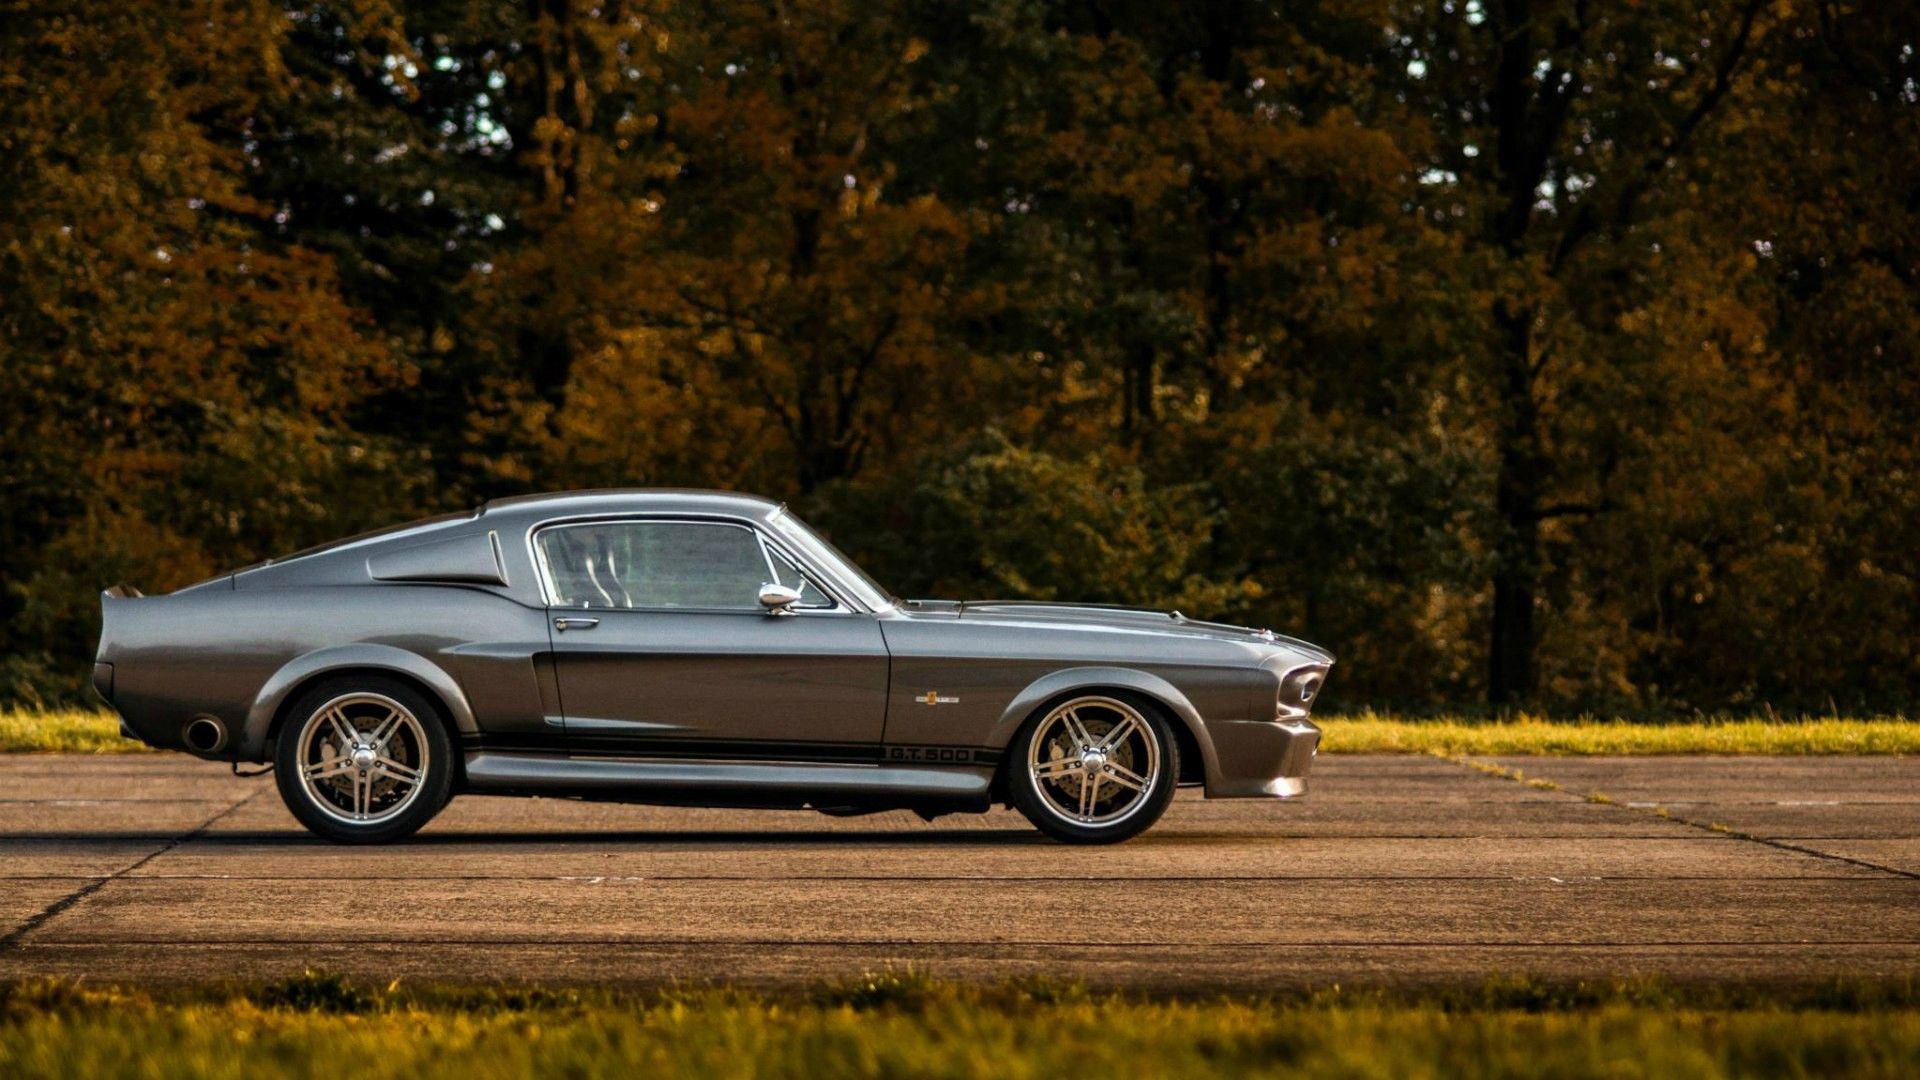 Classic Ford Mustang Wallpaper